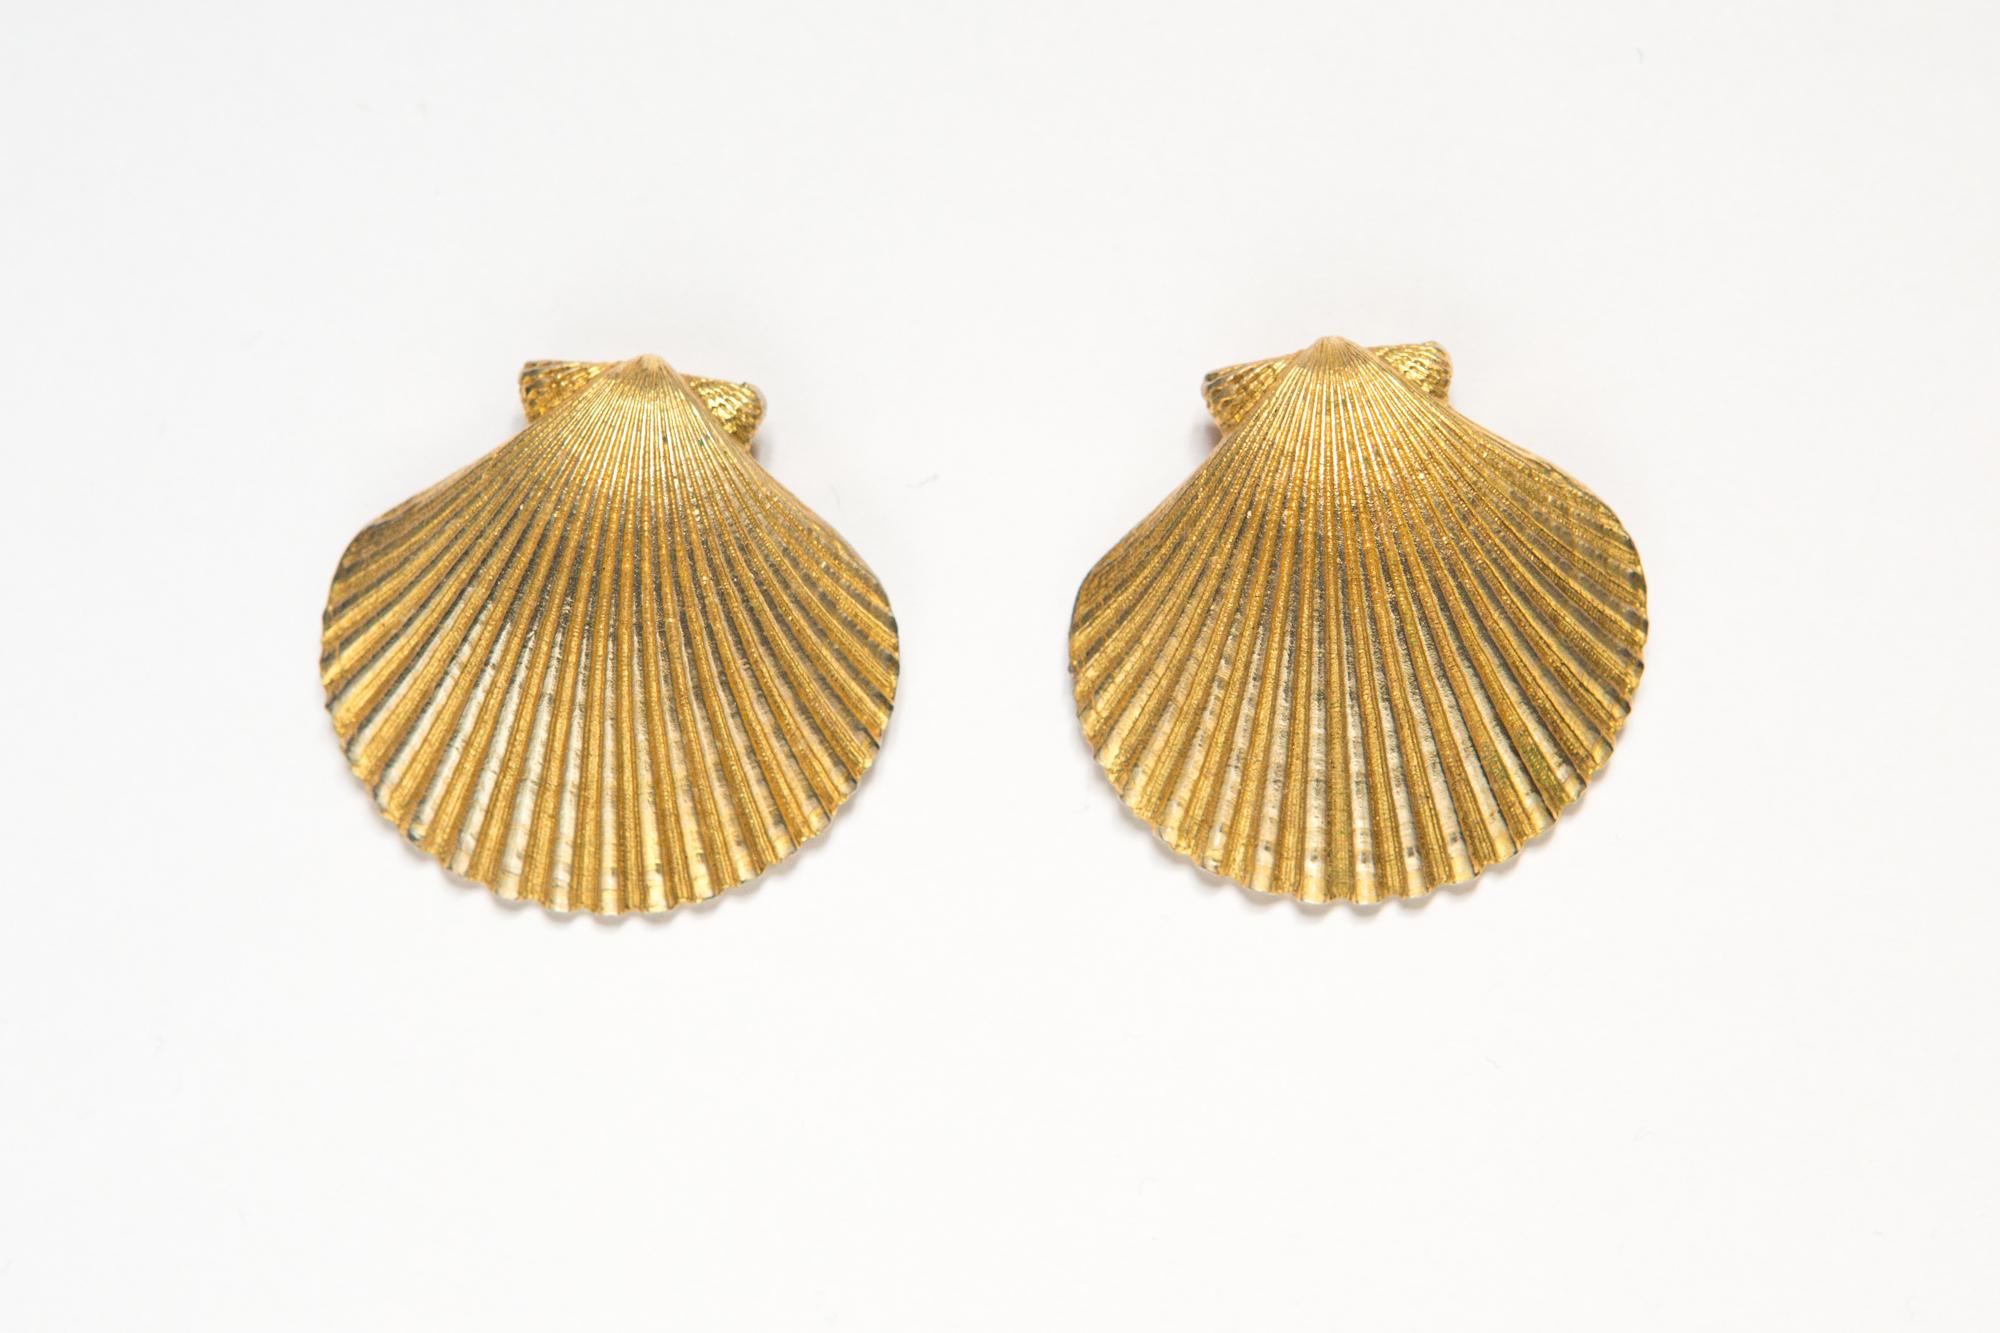 1980s Saint Laurent gold tone seashell clip-on earrings featuring a clip-on fastening and YSL pitted at back.
Total length 1,5in. x 1,5in. (4cm x 4cm). 
In good vintage condition. Made in France.